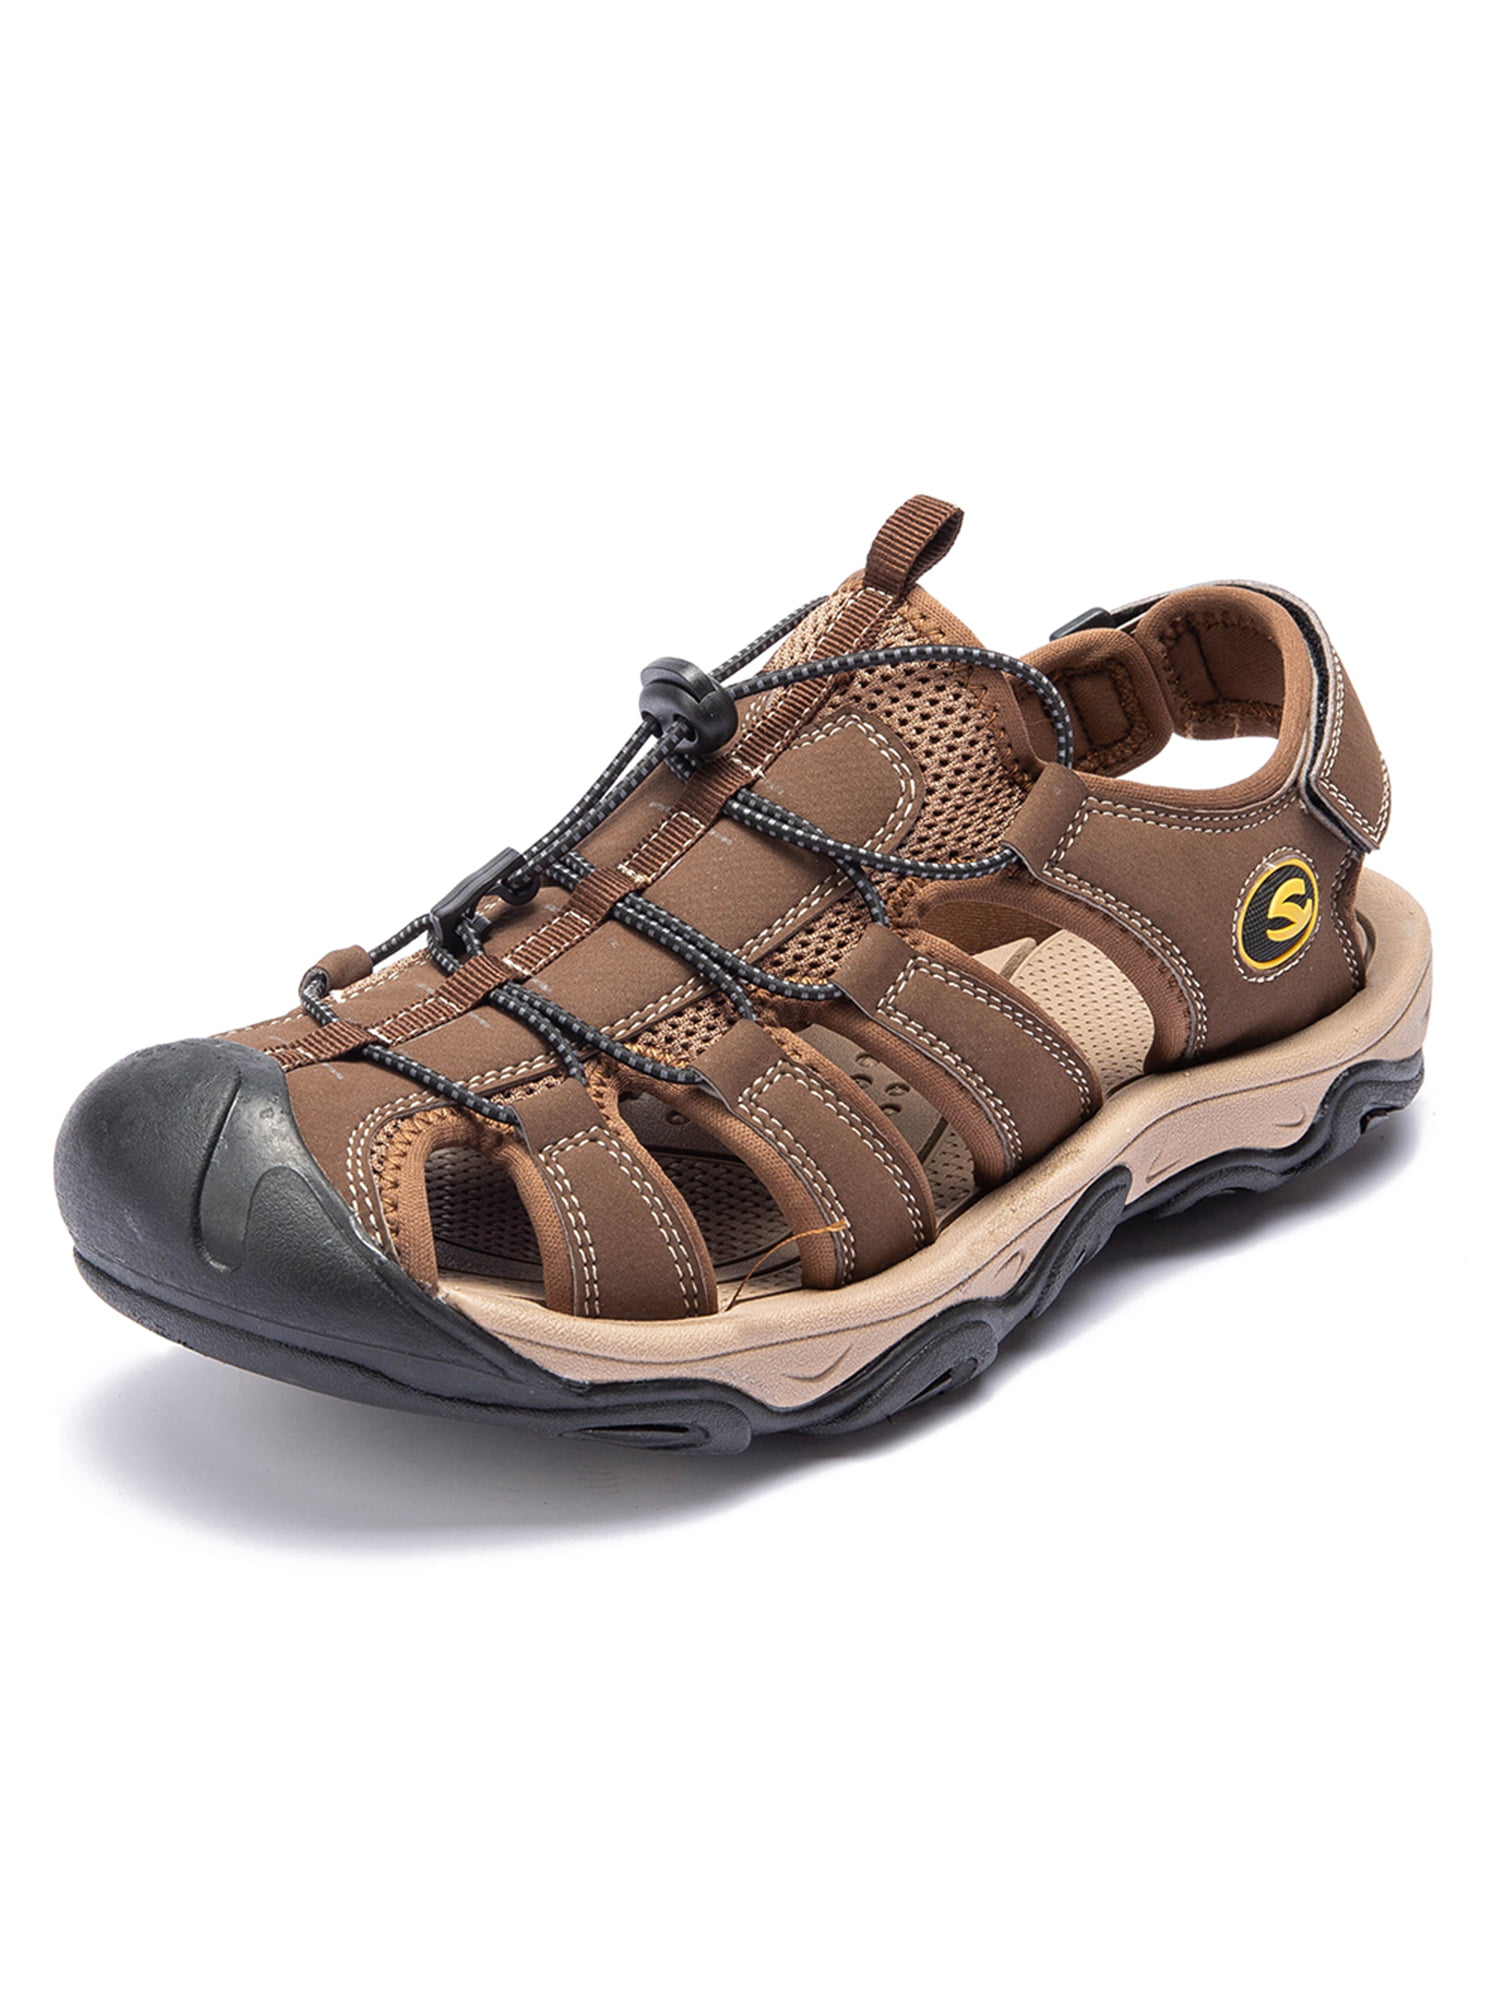 Asifn Men Outdoor Hiking Sandals Breathable Athletic Climbing Summer Beach Shoes Mens Closed Toe Sport Sandal 